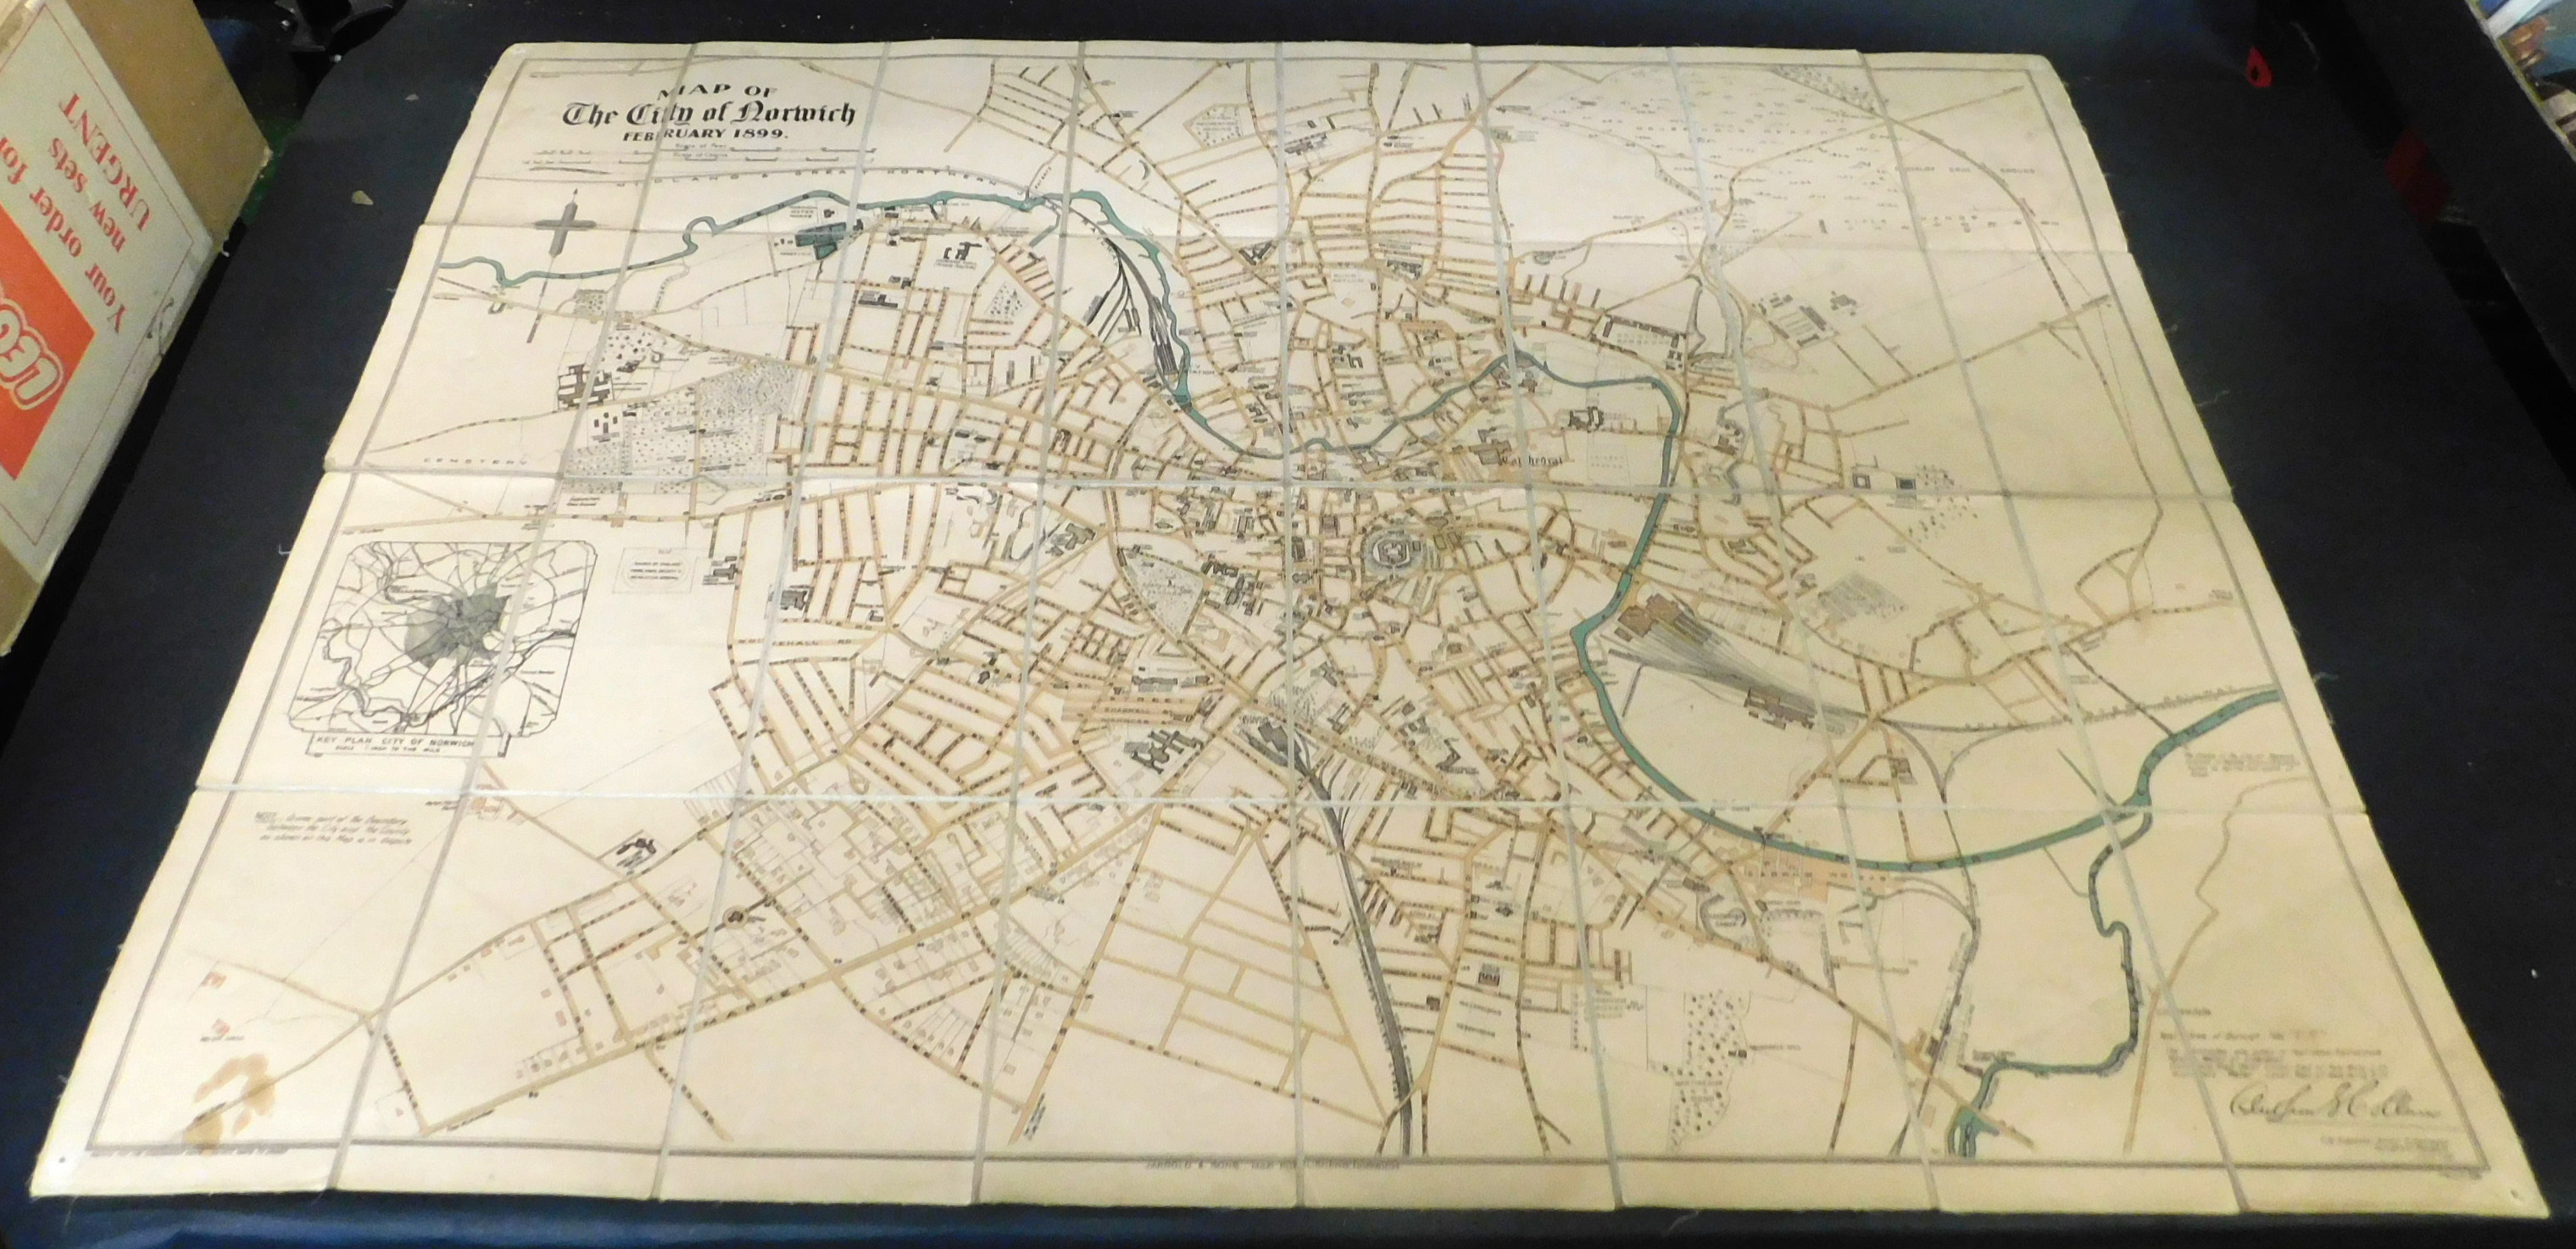 JARROLD & SONS (pub): MAP OF THE CITY OF NORWICH FEBRUARY 1899, hand coloured litho folding map